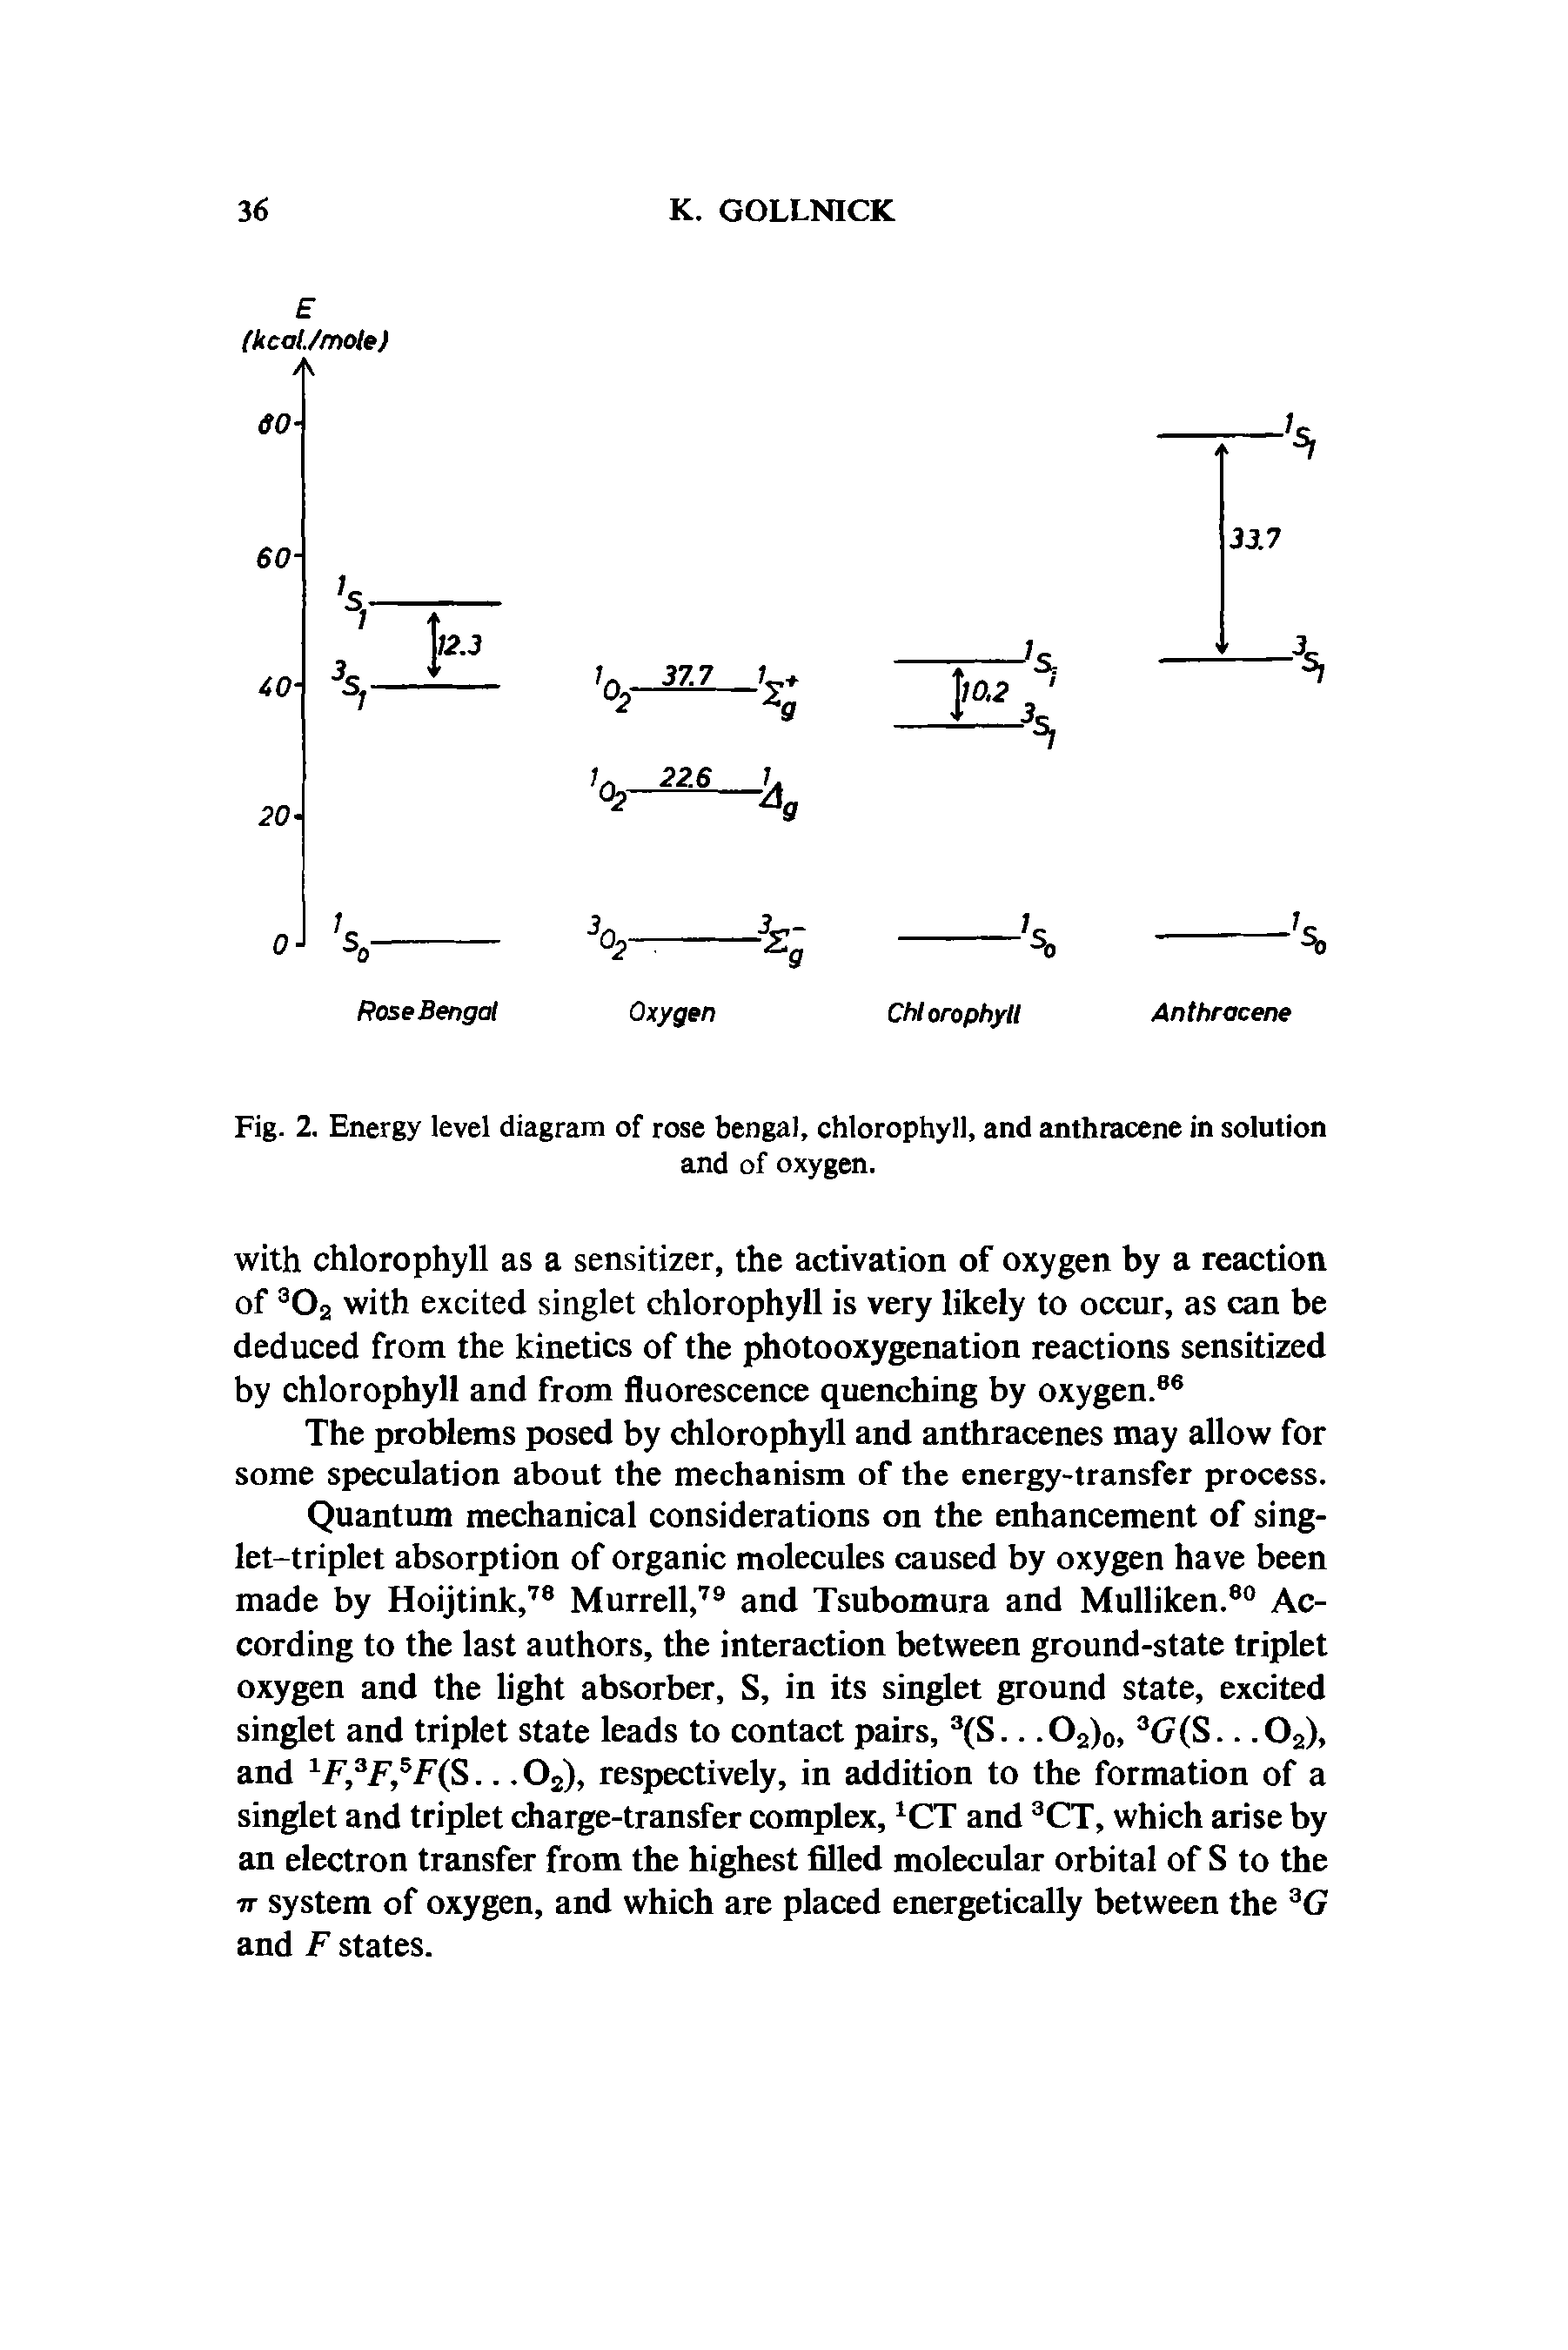 Fig. 2. Energy level diagram of rose bengal, chlorophyll, and anthracene in solution...